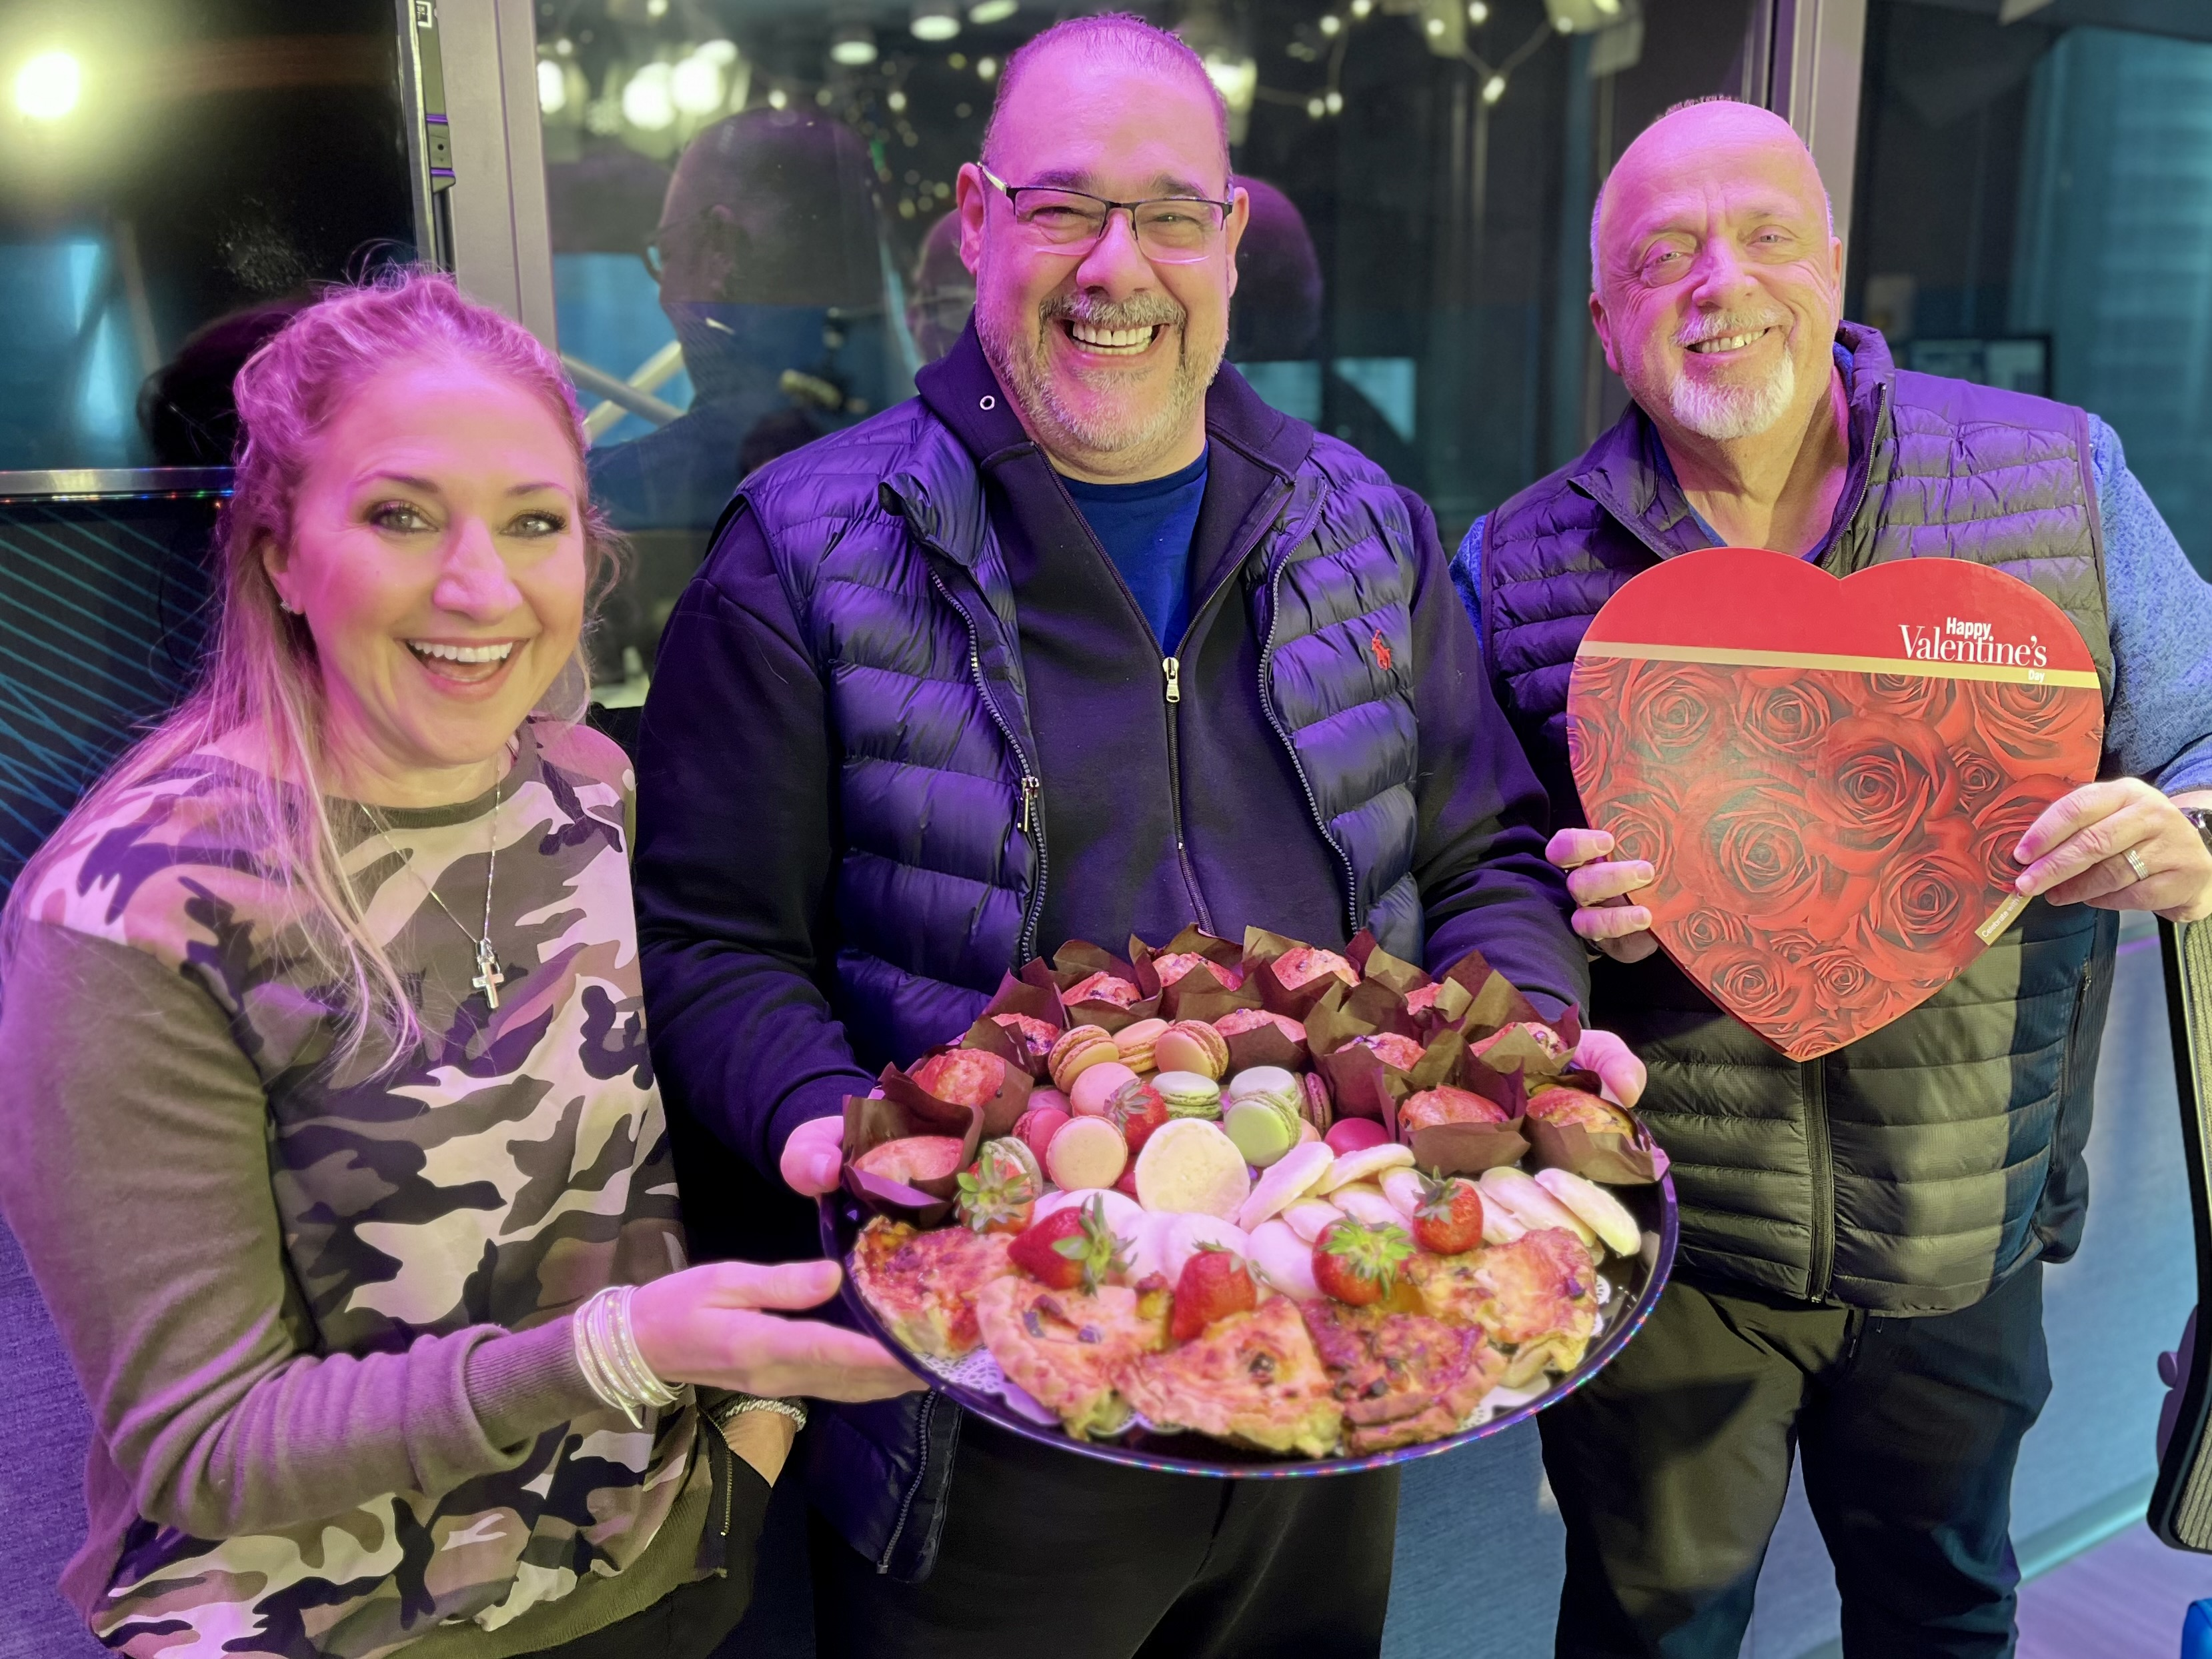 'We're bringing romance back to dining.' - Owner of Marco's Kitchen Chef Marco on the Steve Cochran Show